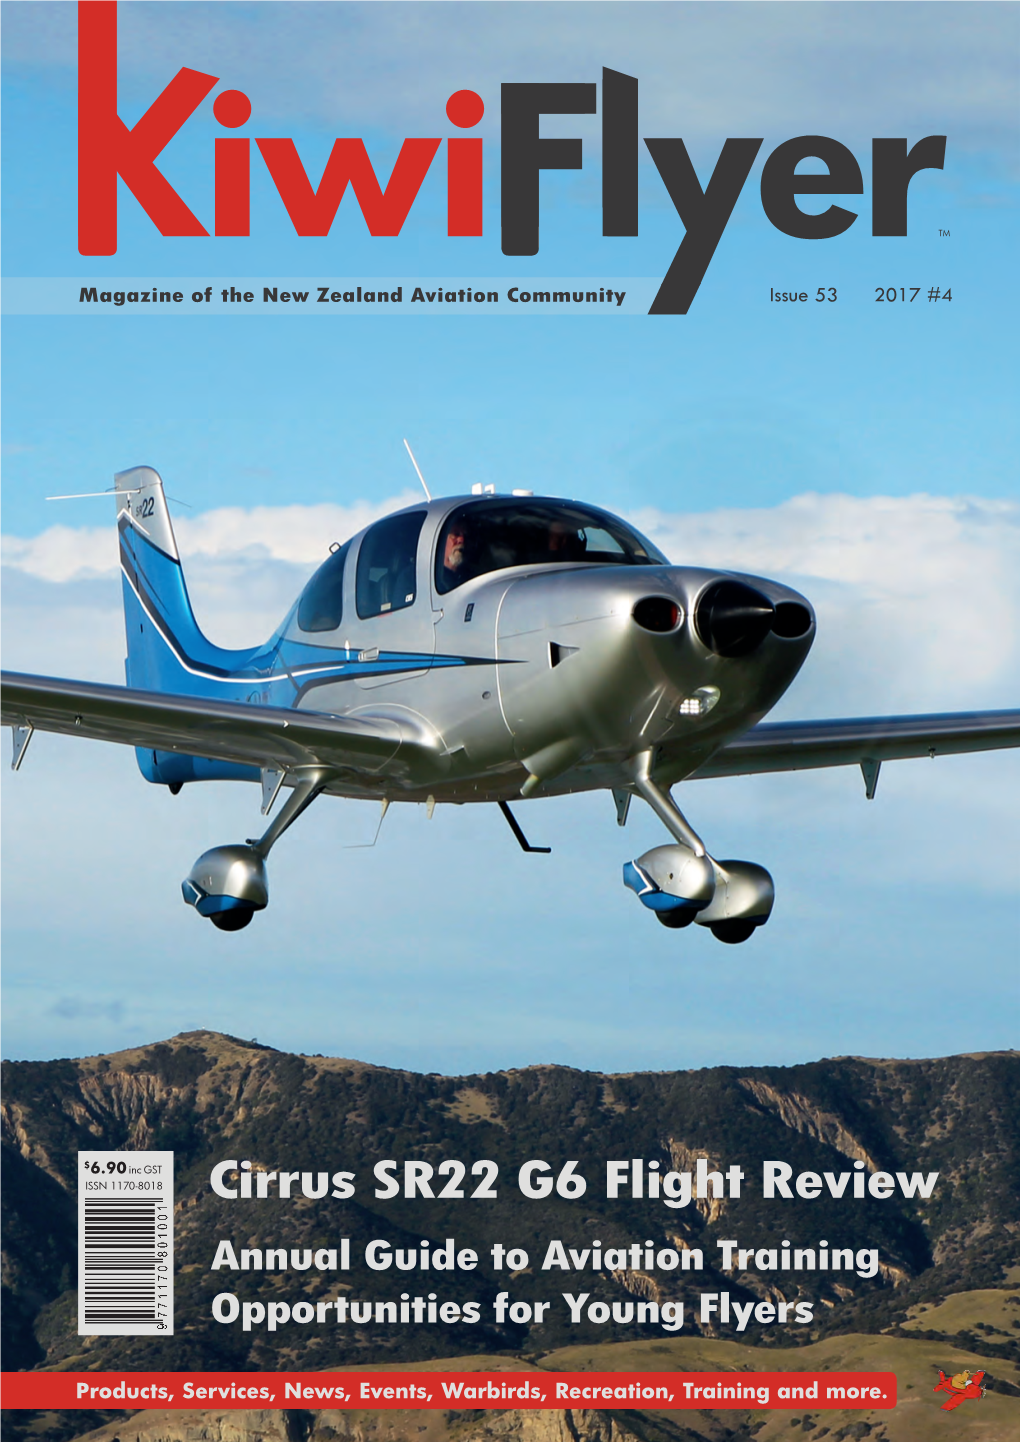 Cirrus SR22 G6 Flight Review Annual Guide to Aviation Training Opportunities for Young Flyers